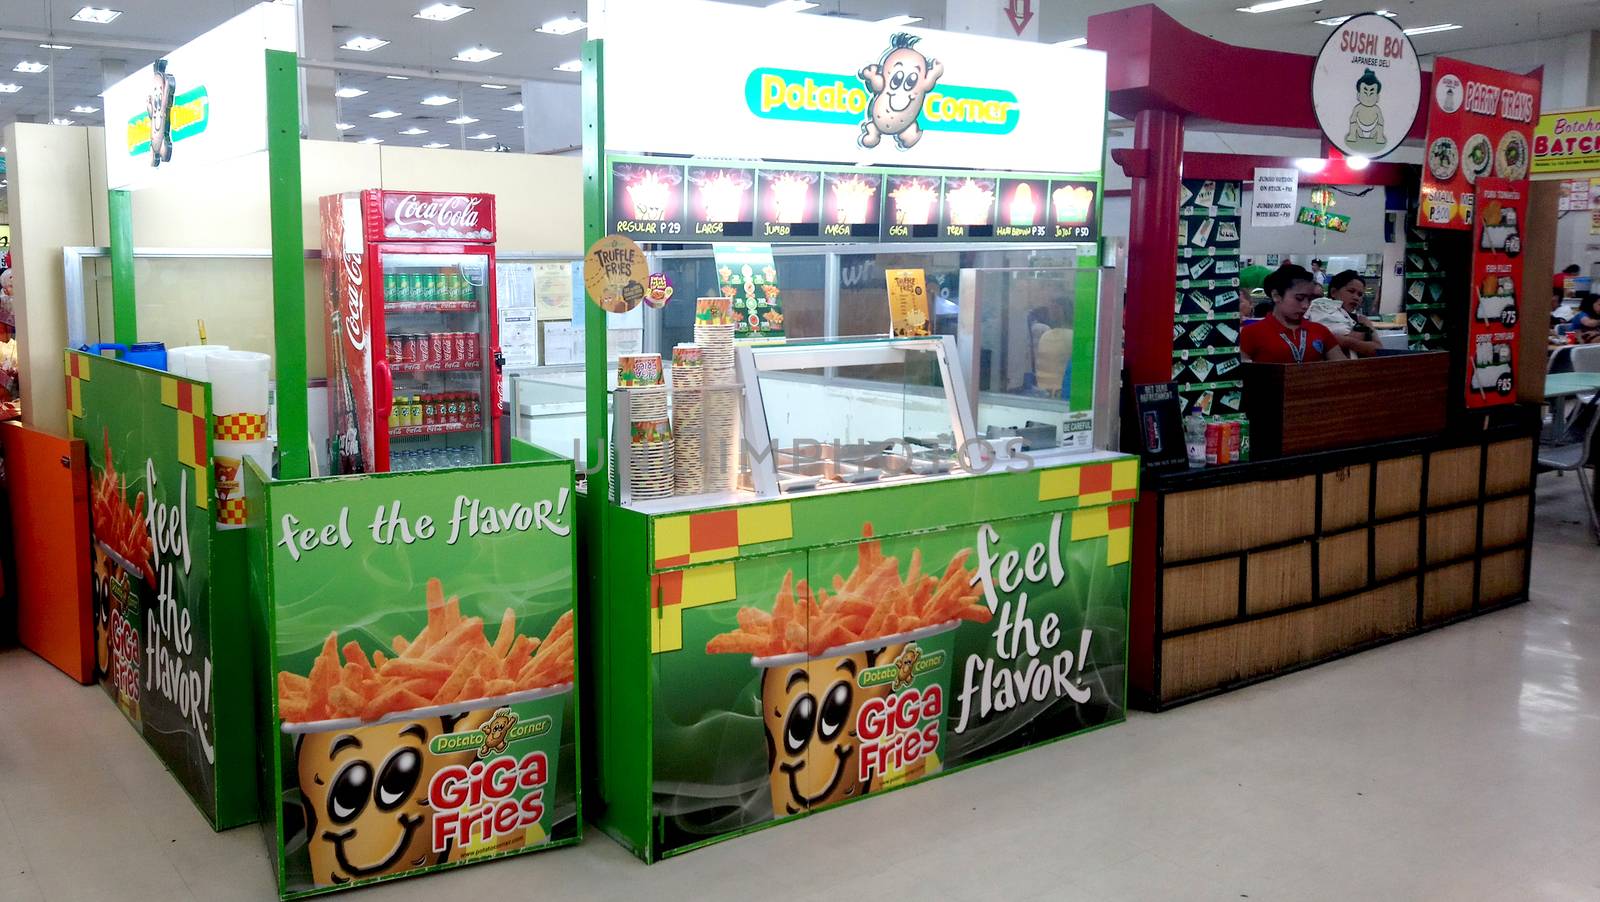 Potato corner booth in Quezon City, Philippines by imwaltersy